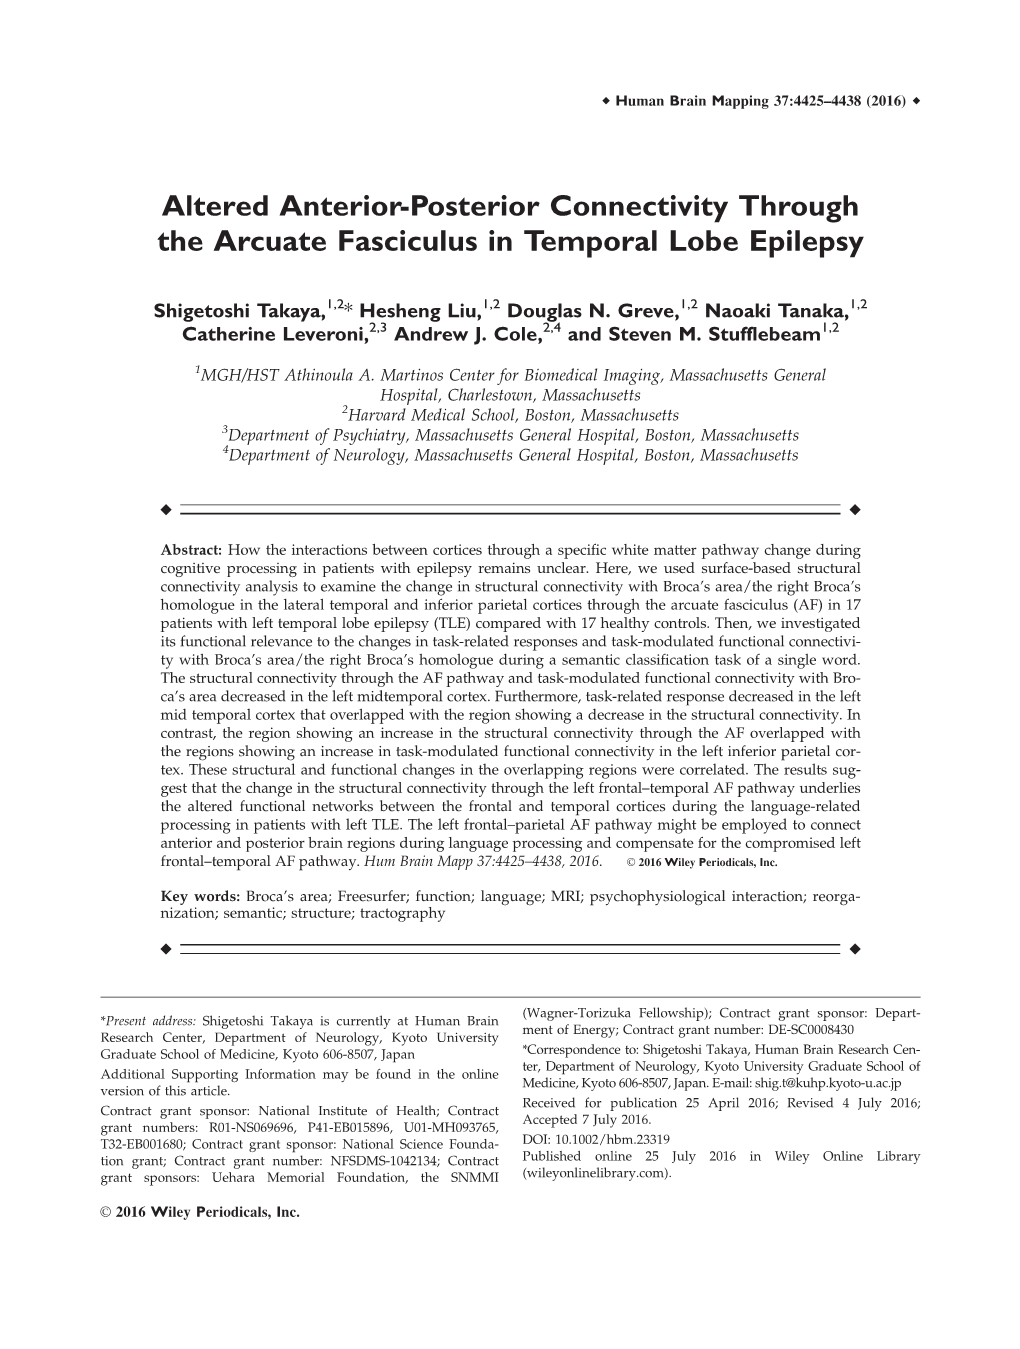 Posterior Connectivity Through the Arcuate Fasciculus in Temporal Lobe Epilepsy